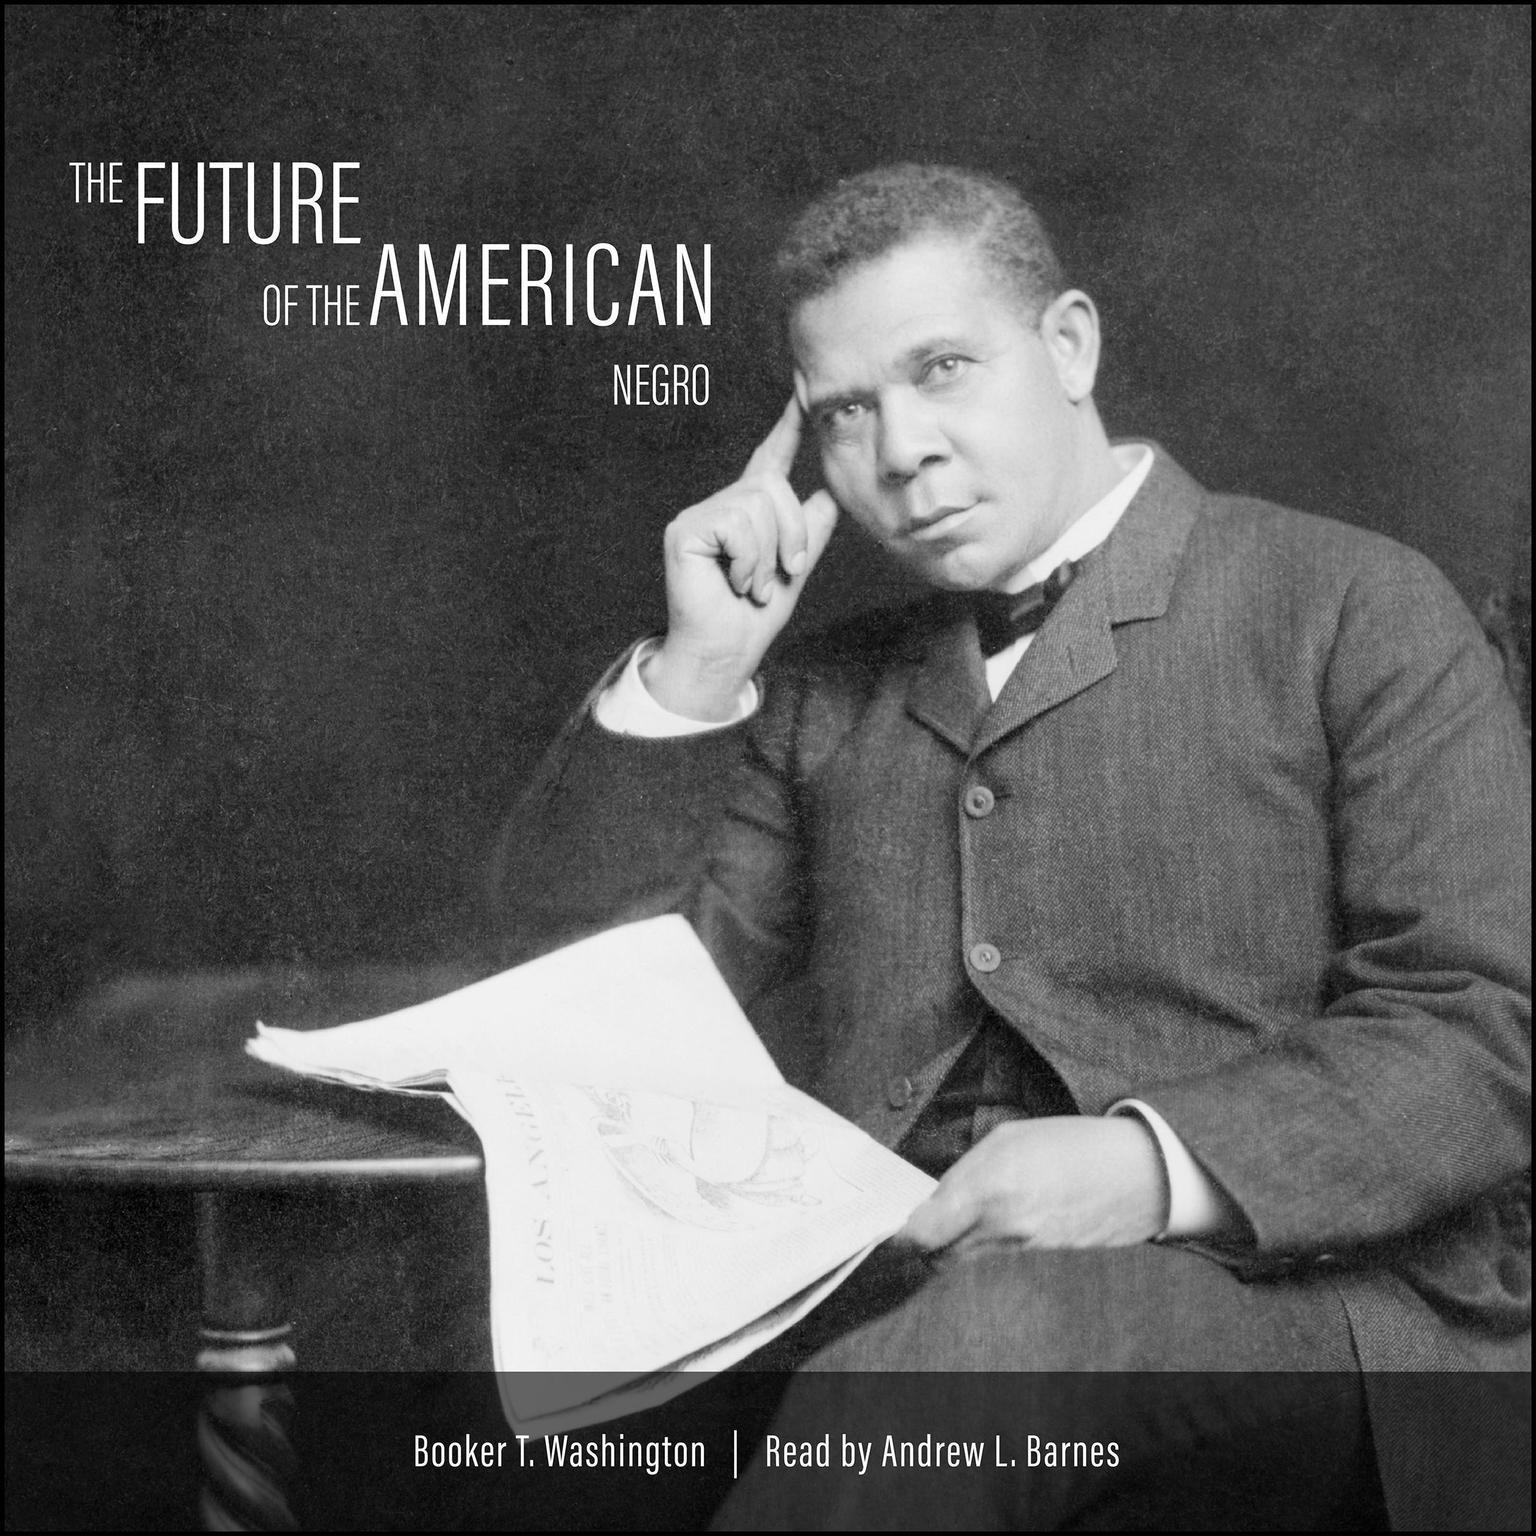 The Future of the American Negro Audiobook, by Booker T. Washington